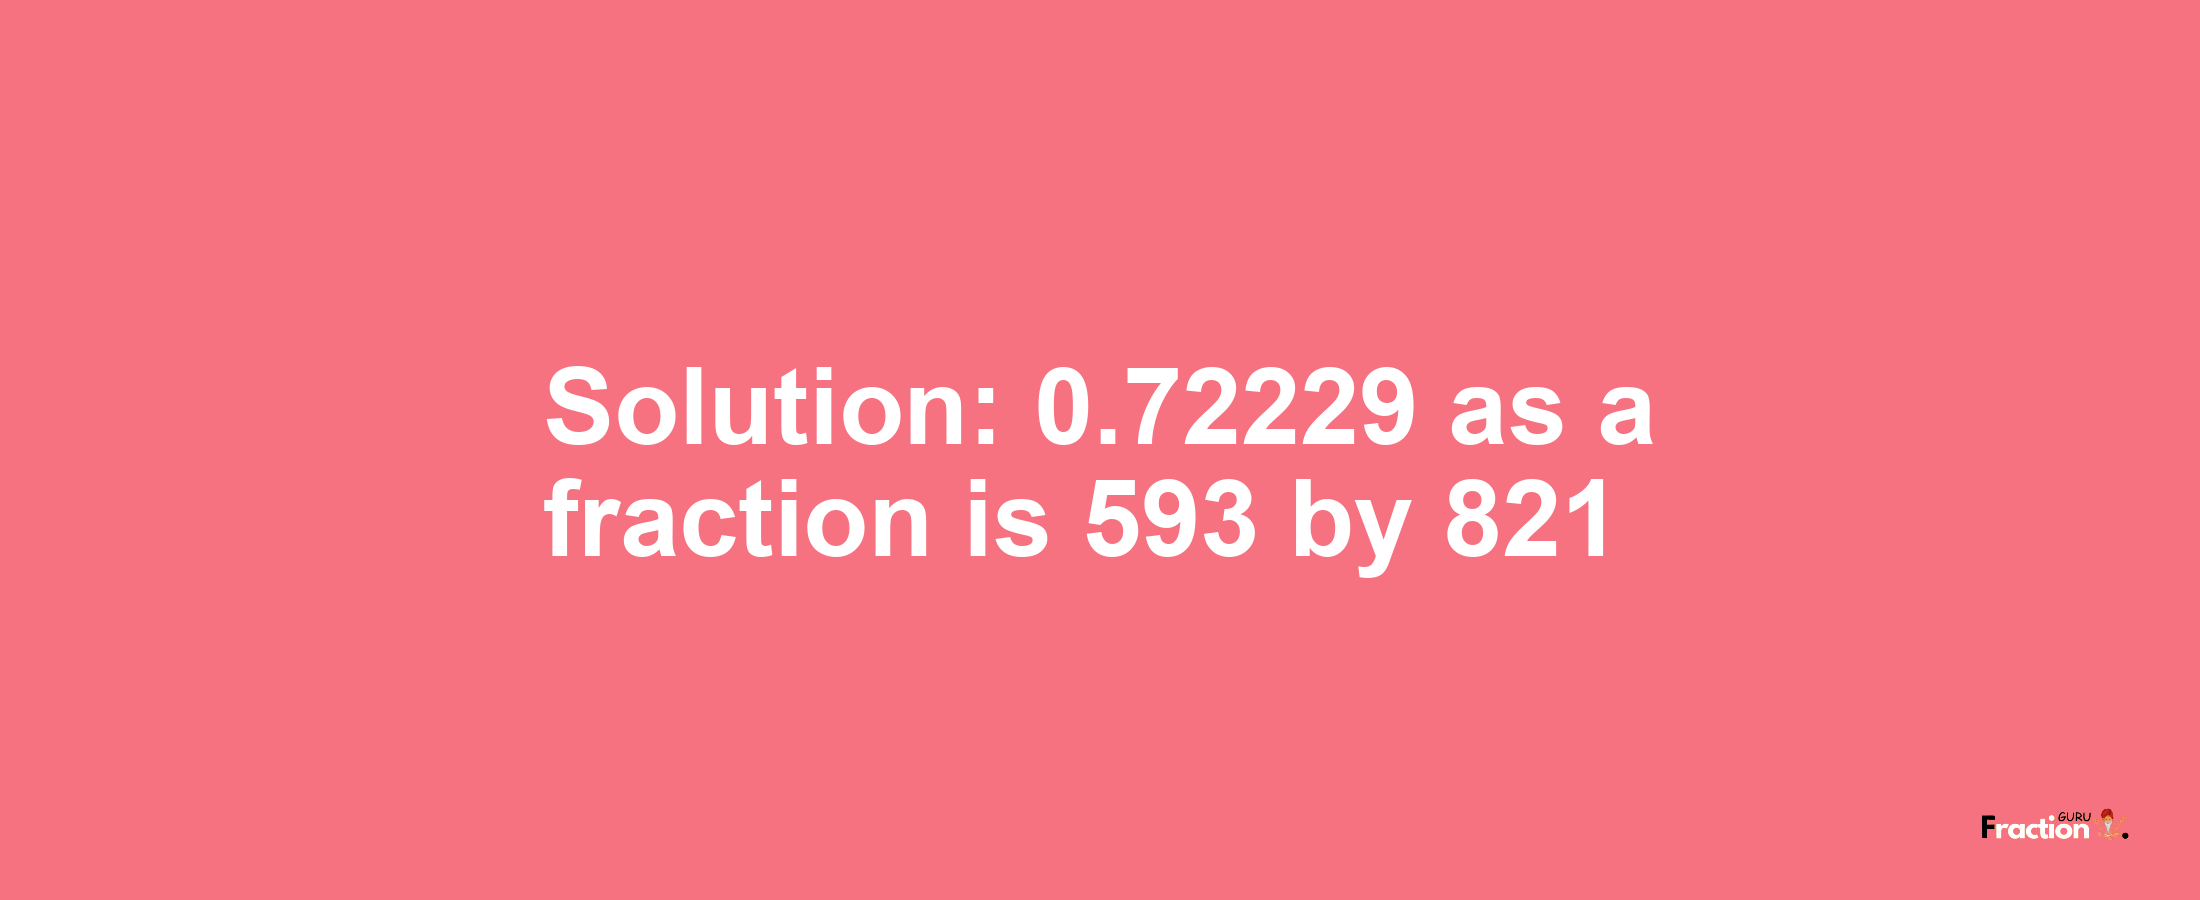 Solution:0.72229 as a fraction is 593/821